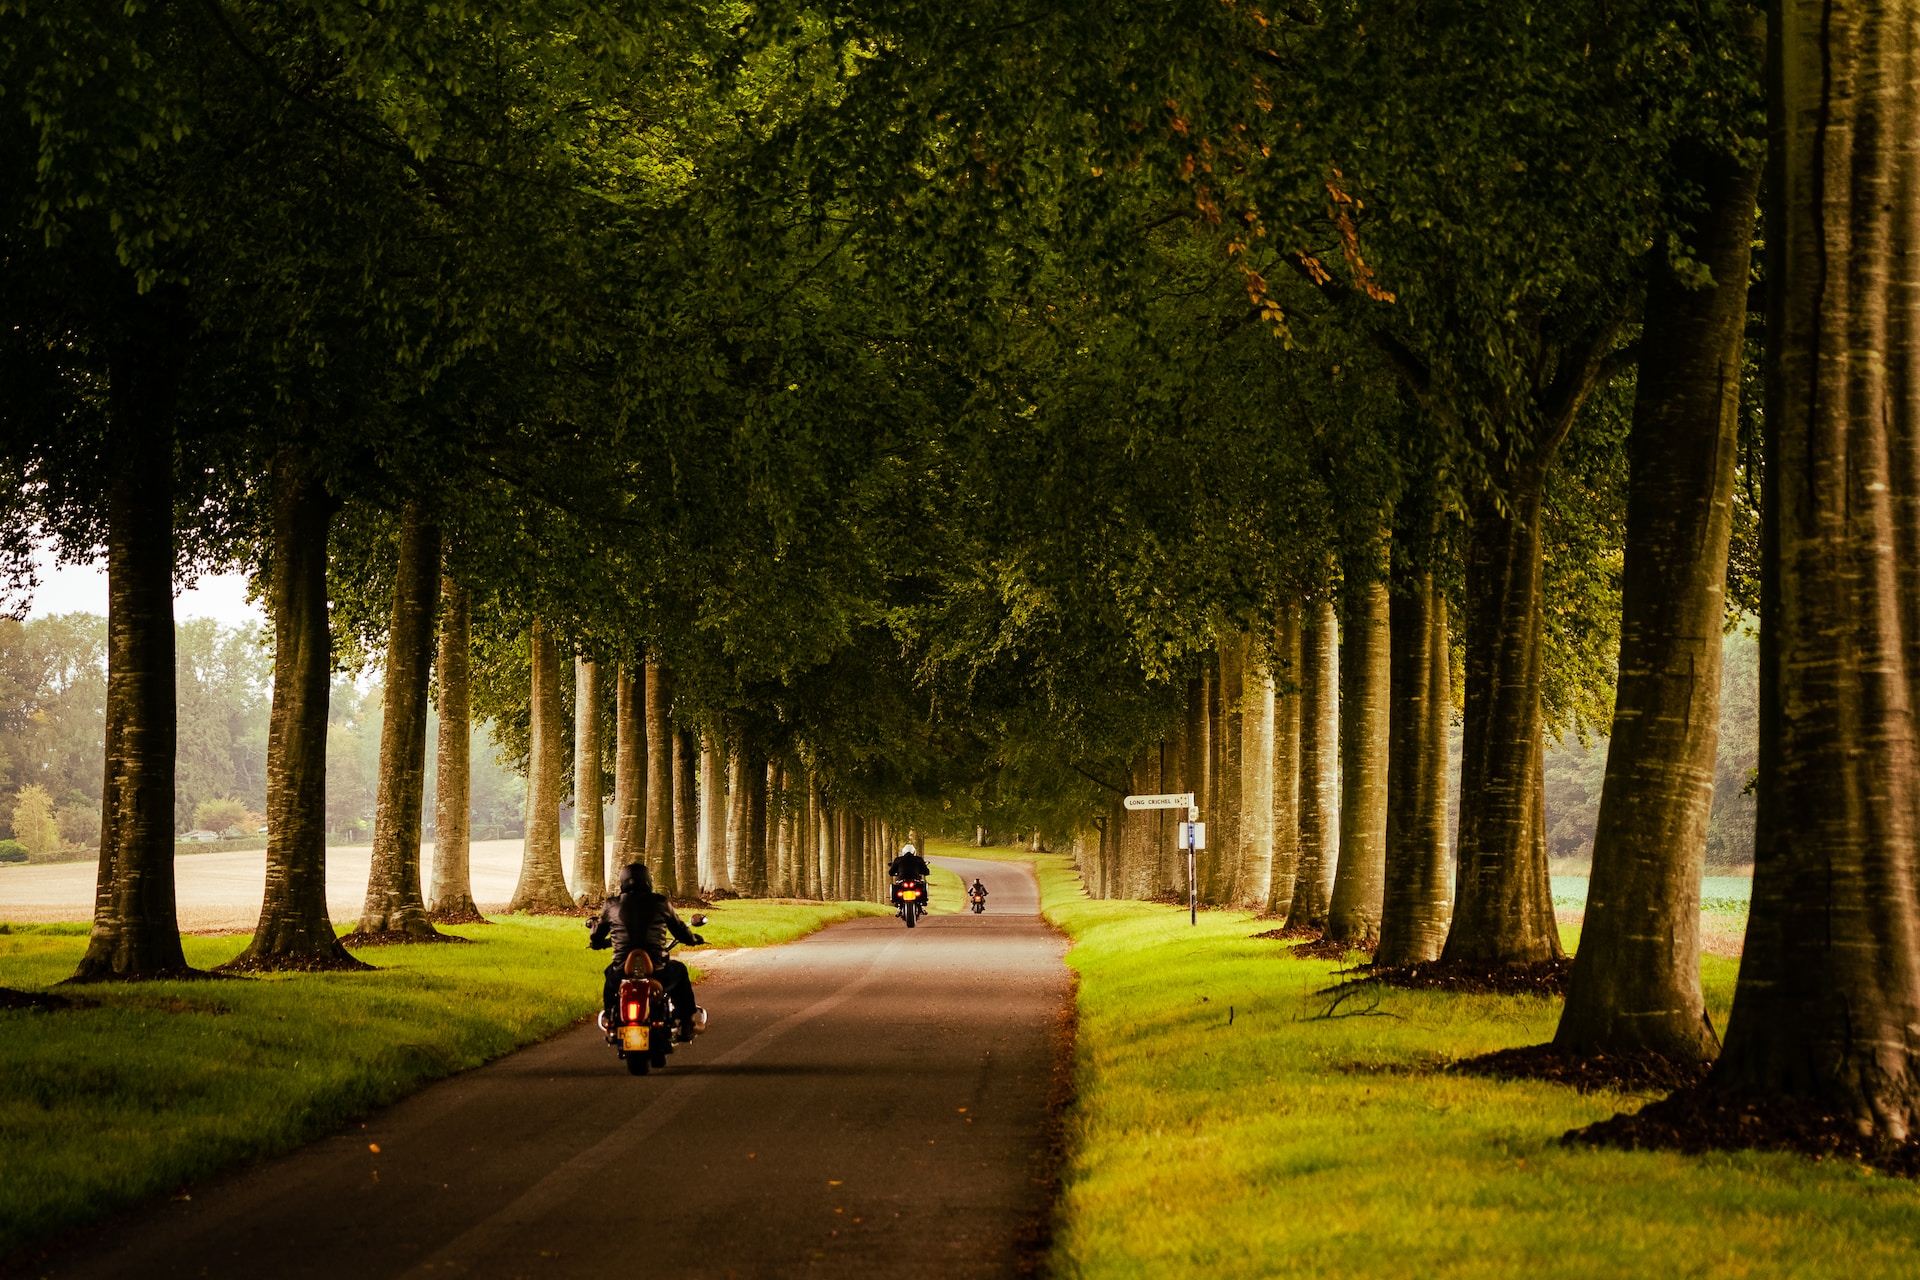 motorbikes driven through a road surrounded by trees